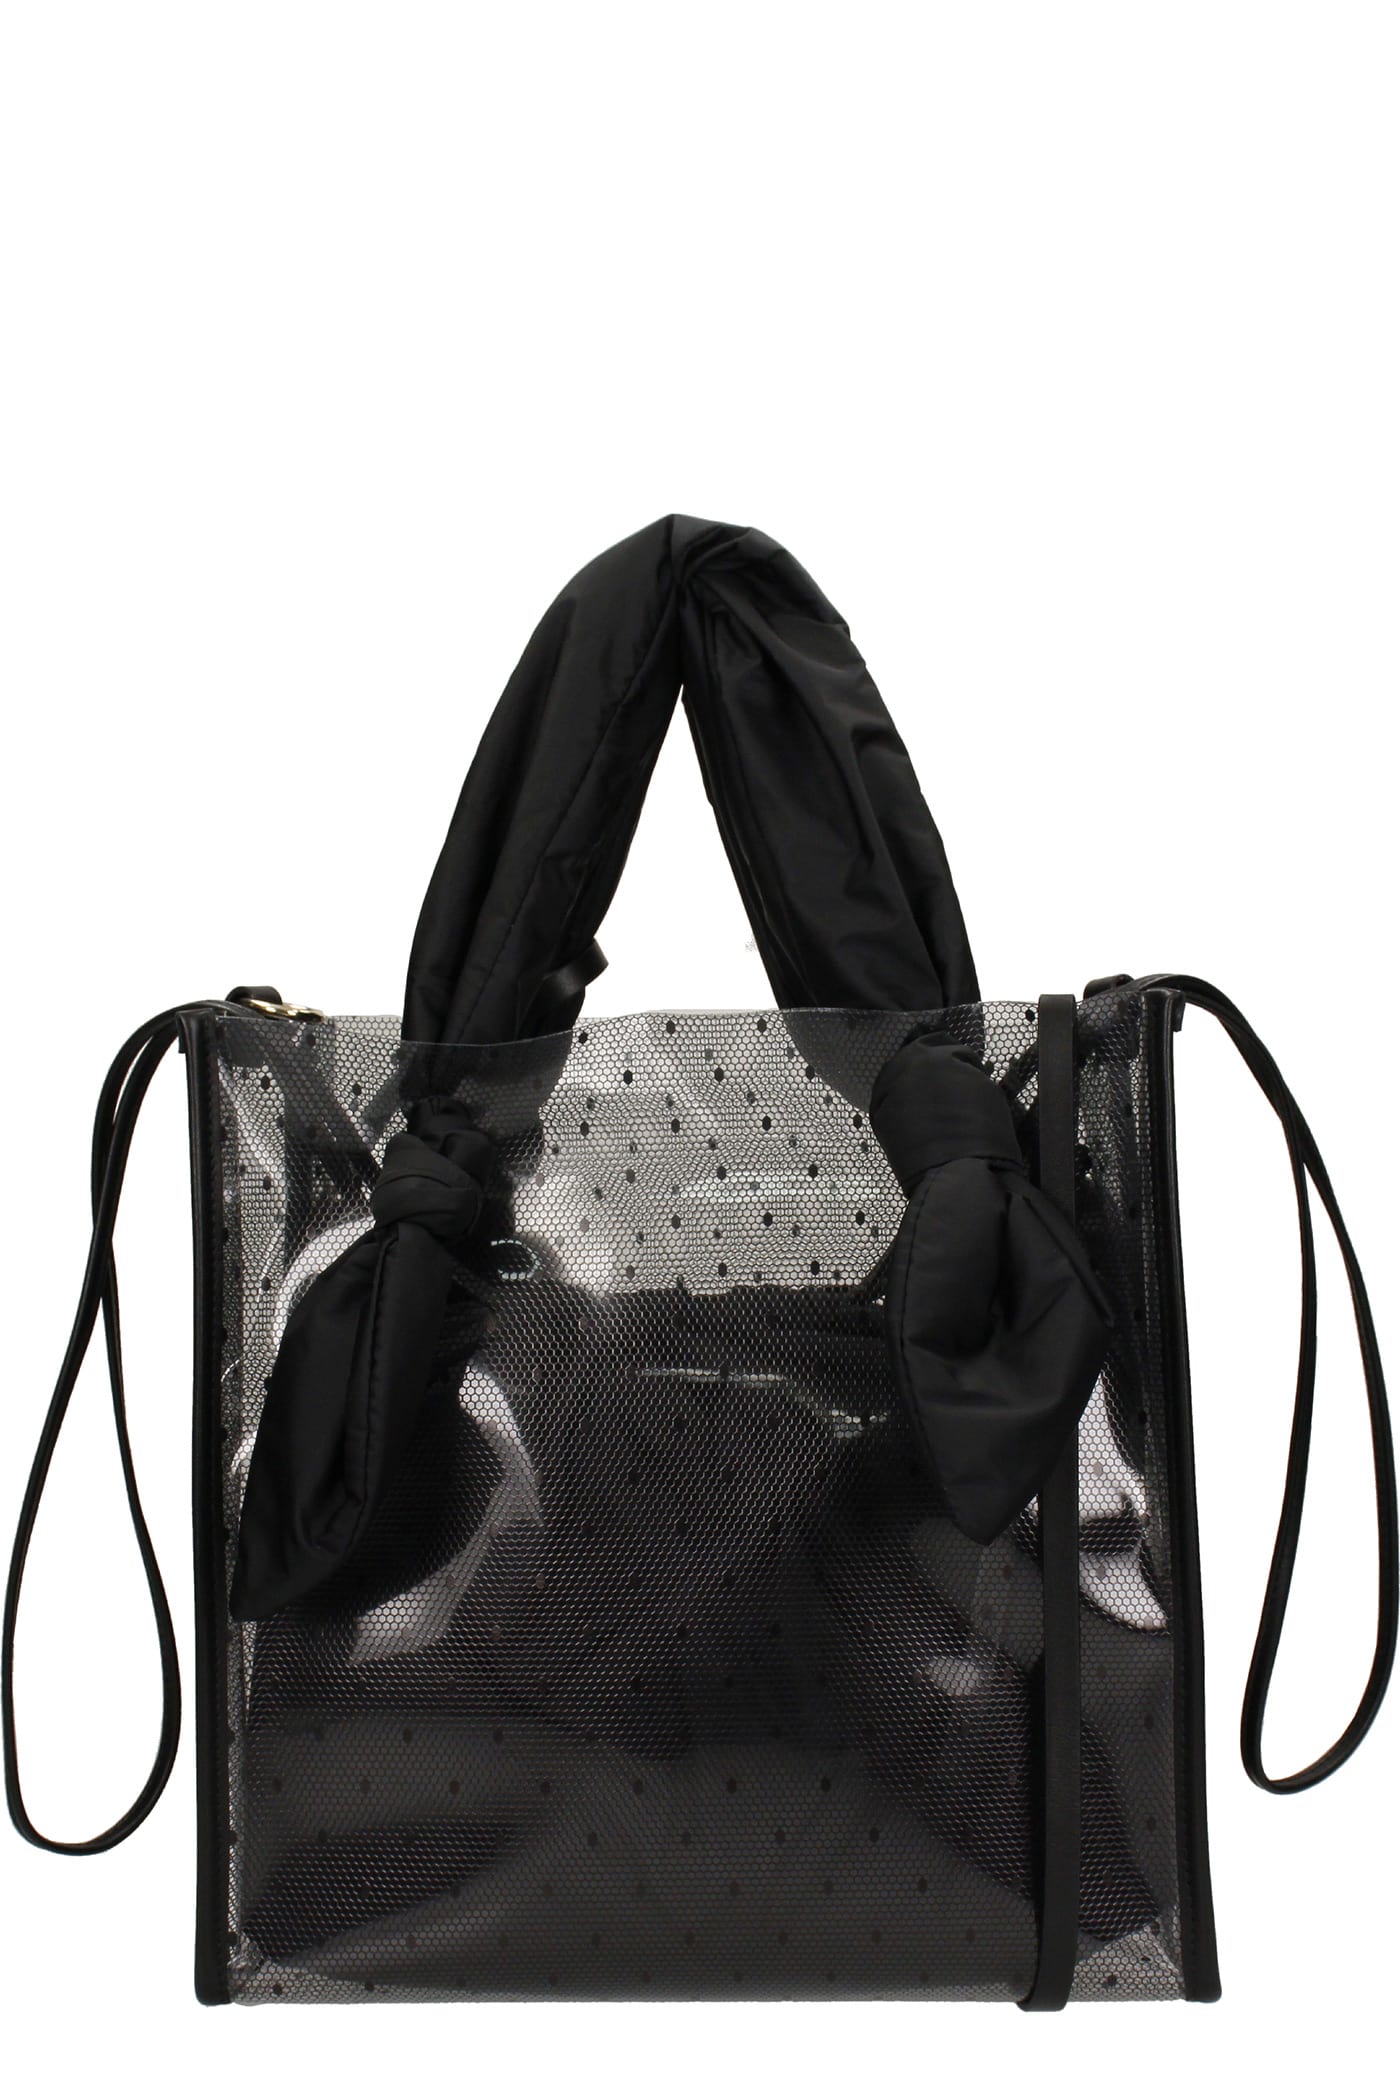 RED Valentino Tote In Black Synthetic Fibers